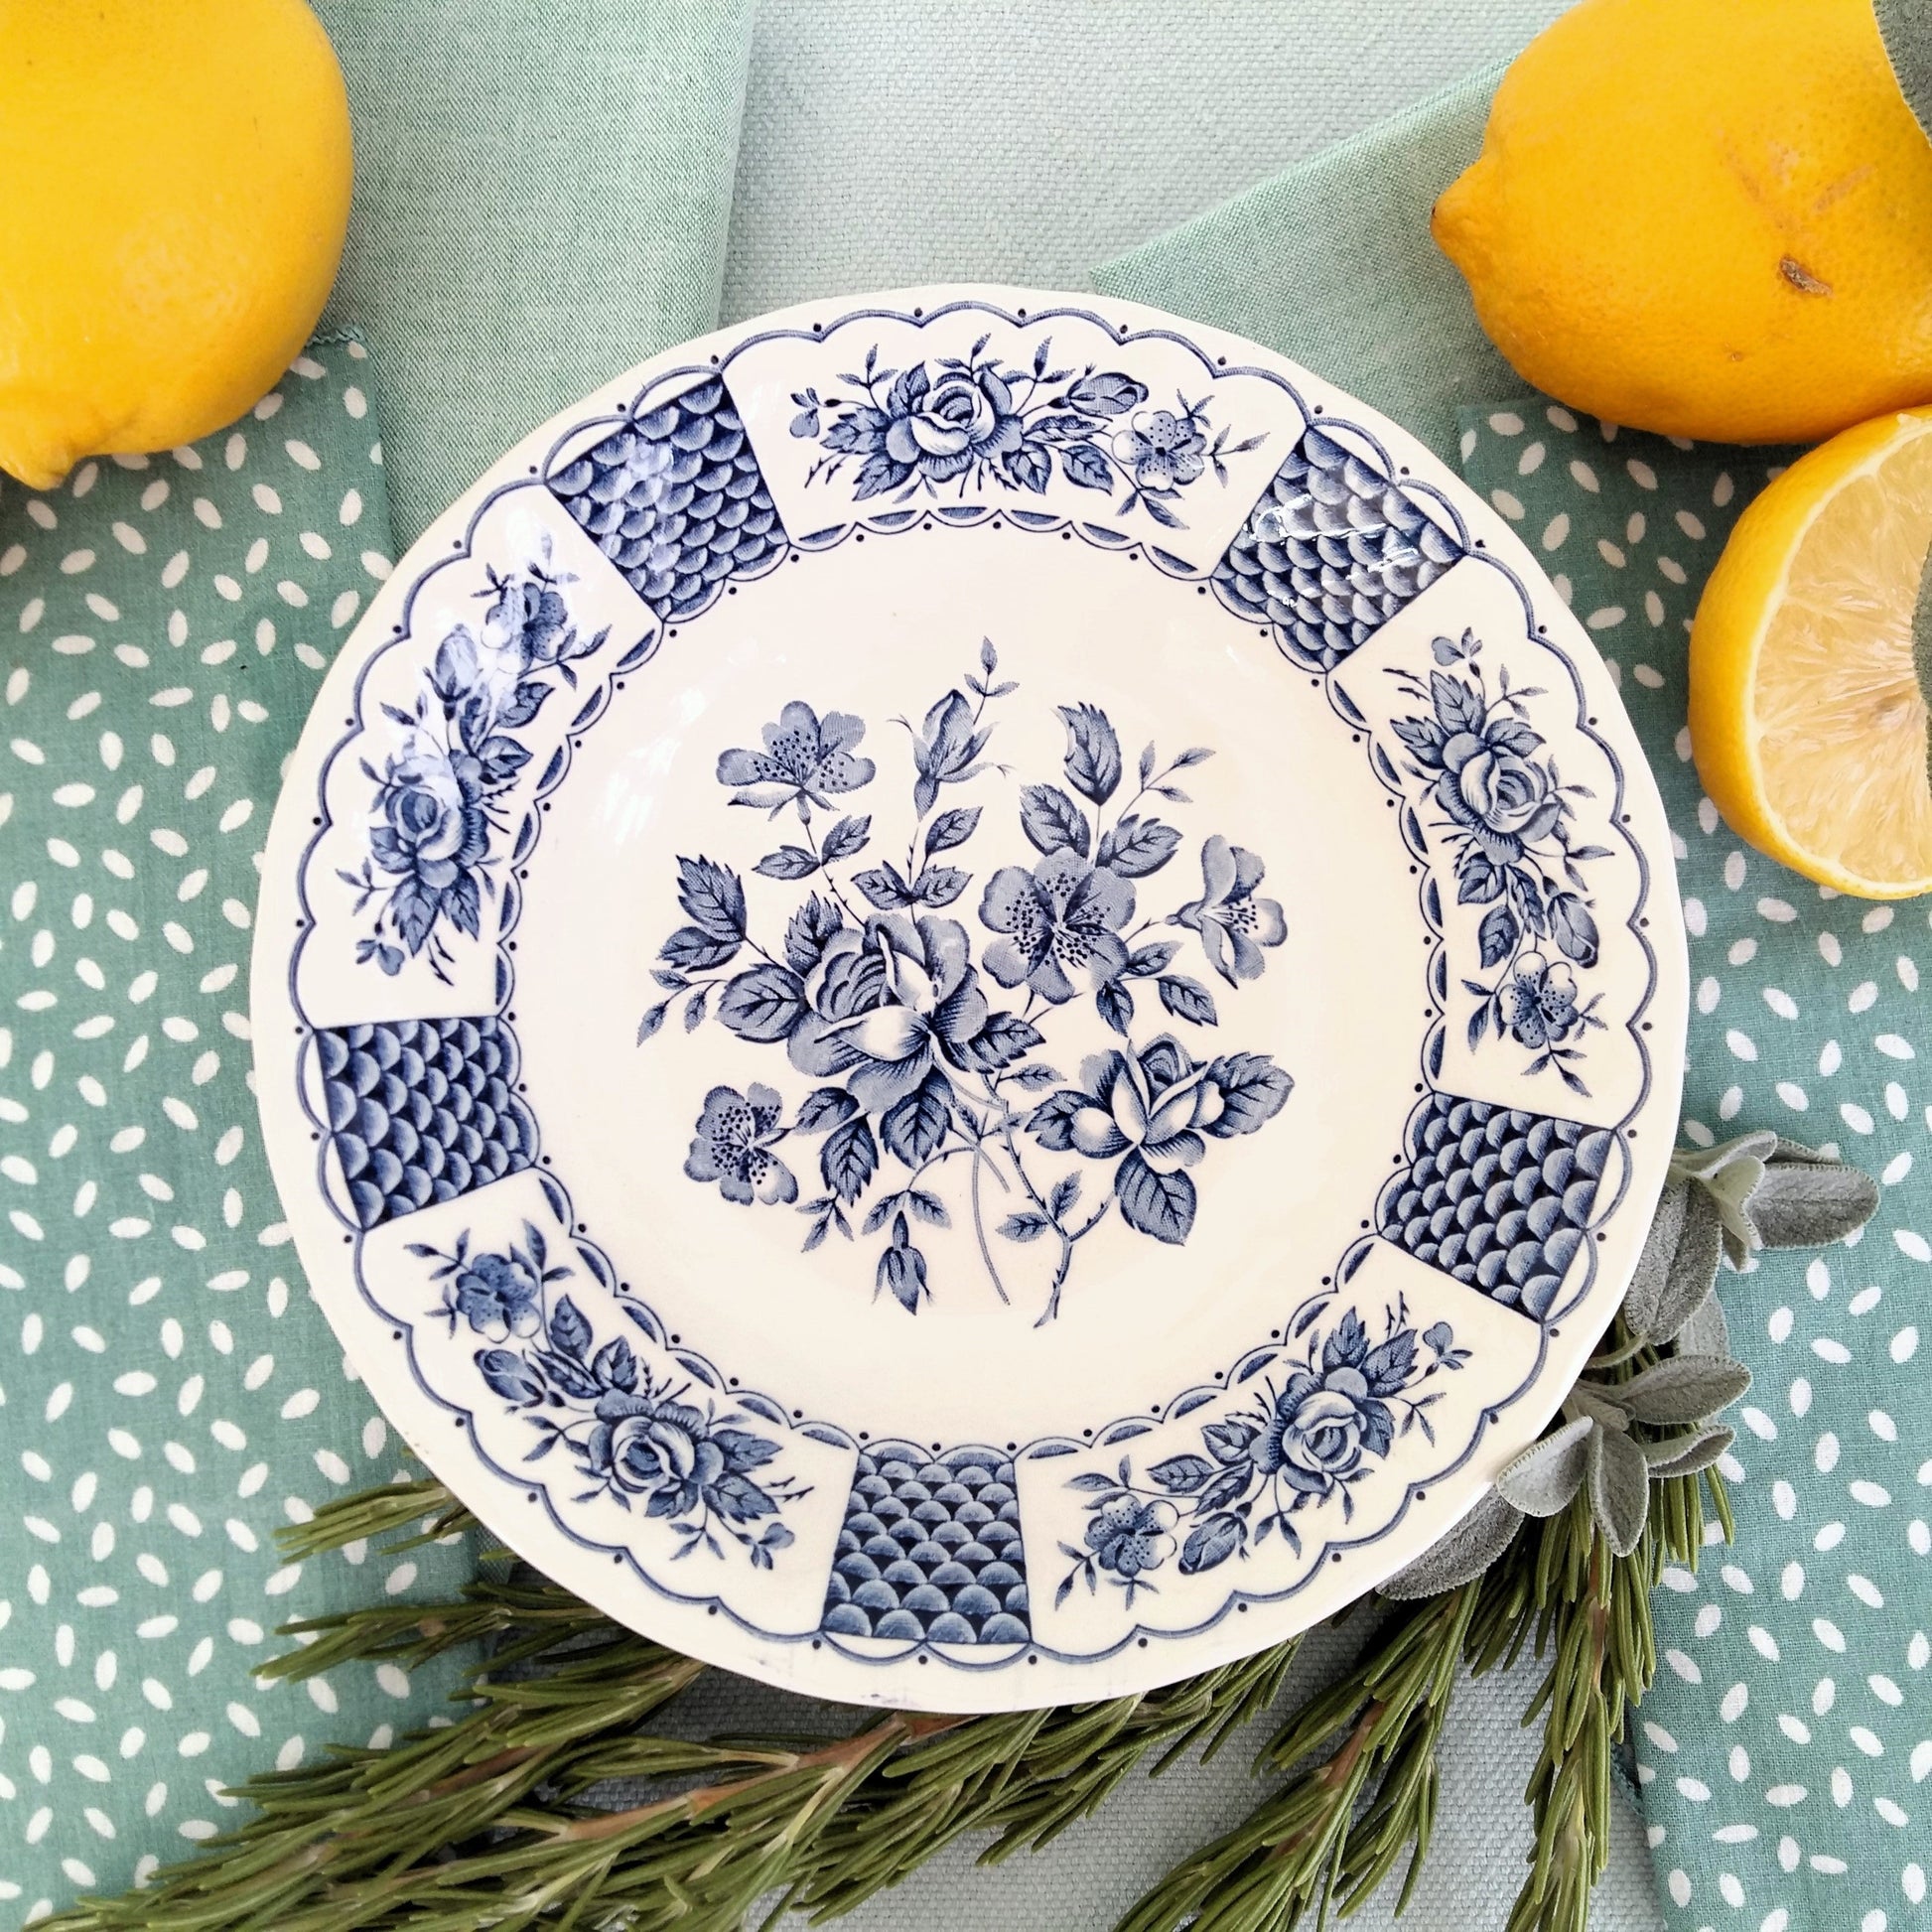 8 mix and match transferware plates From Tiggy & Pip. €199 With FREE worldwide shipping.